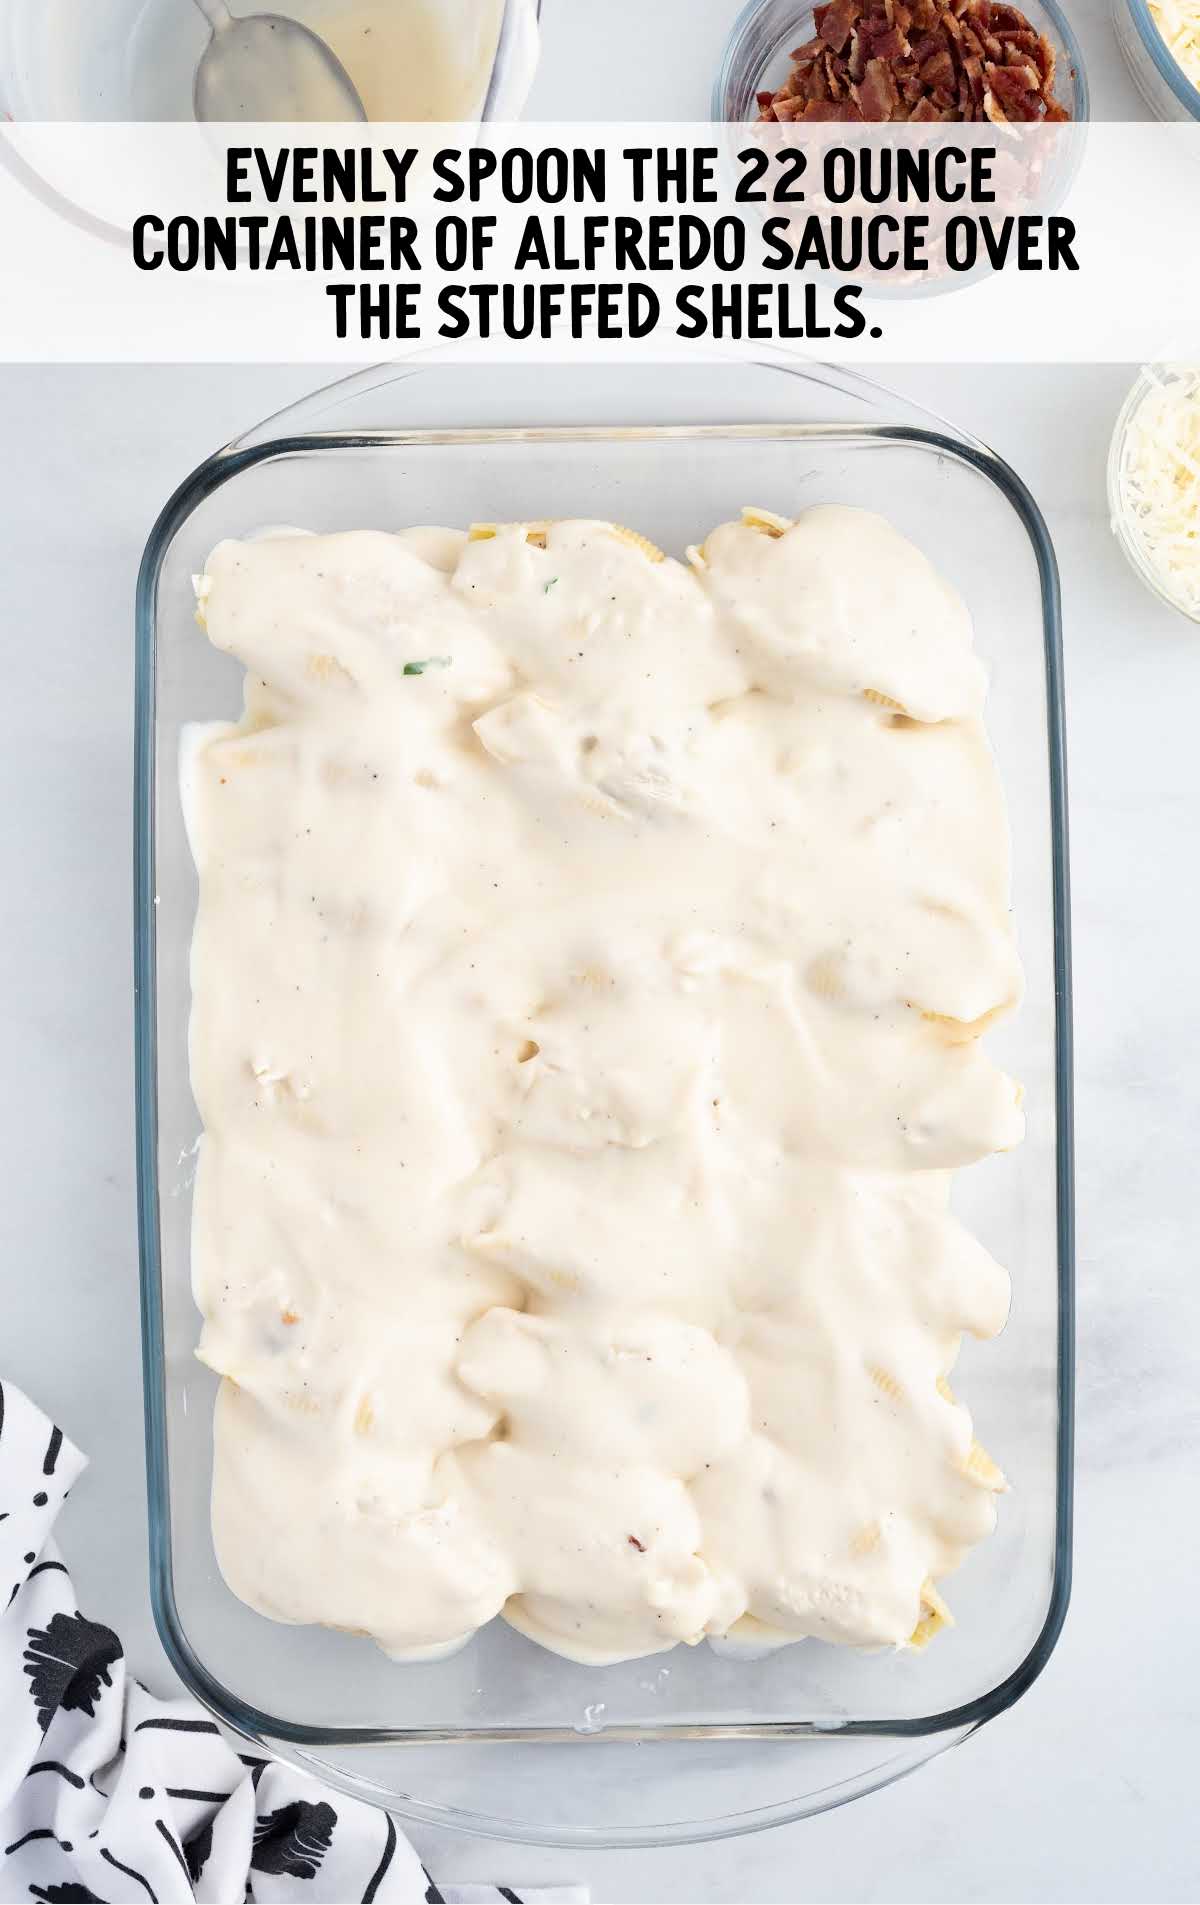 alfredo sauce spooned over the stuffed shell in a baking dish